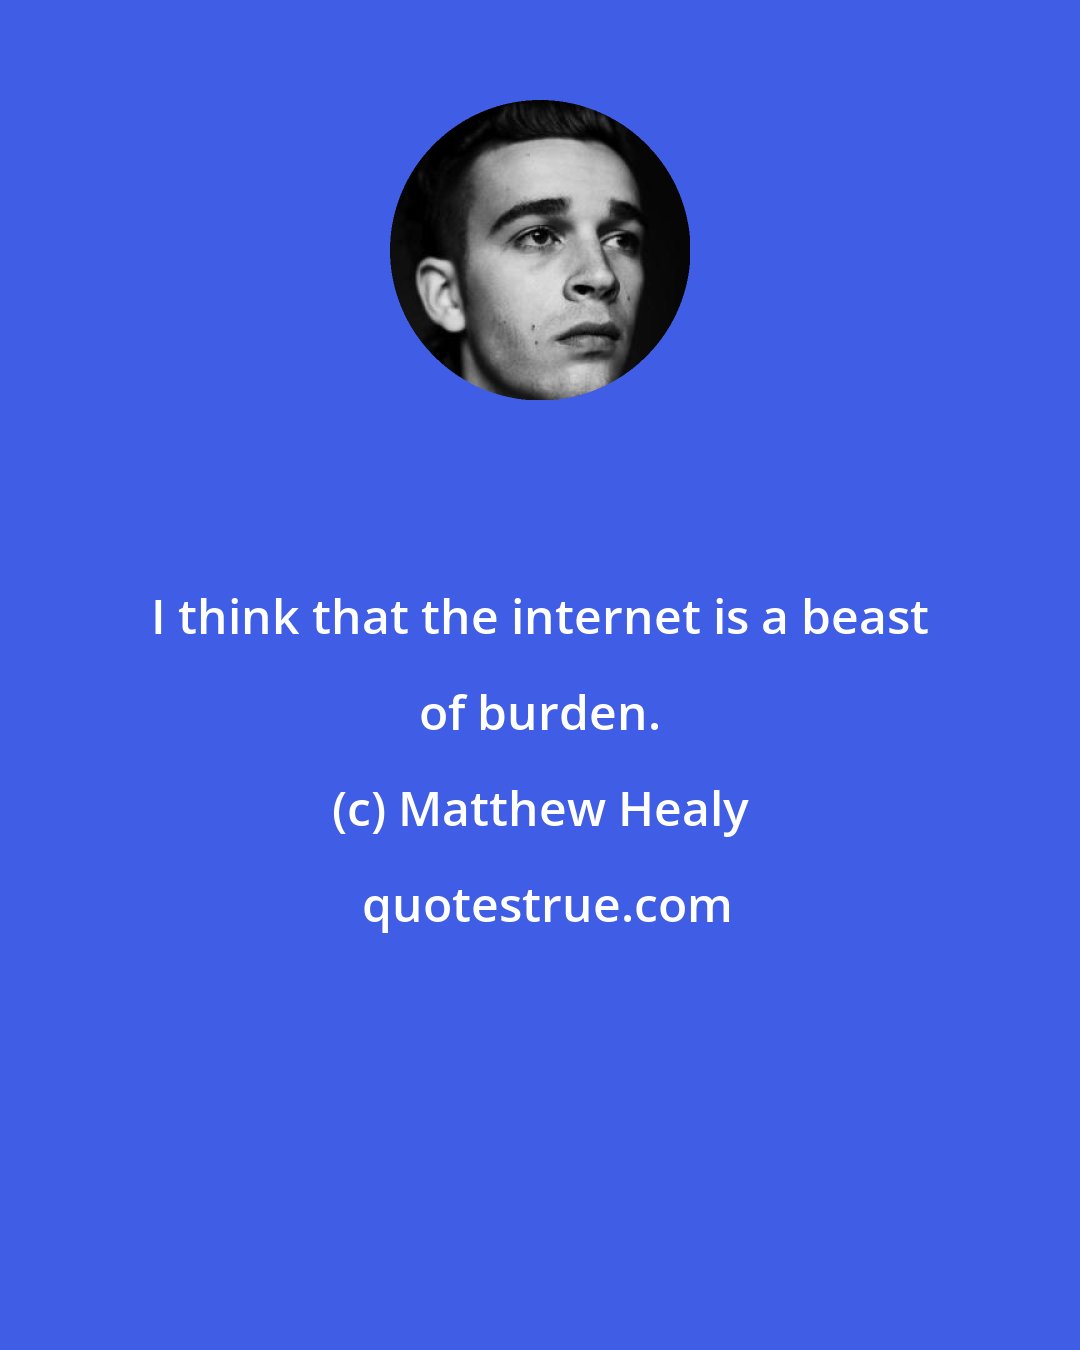 Matthew Healy: I think that the internet is a beast of burden.